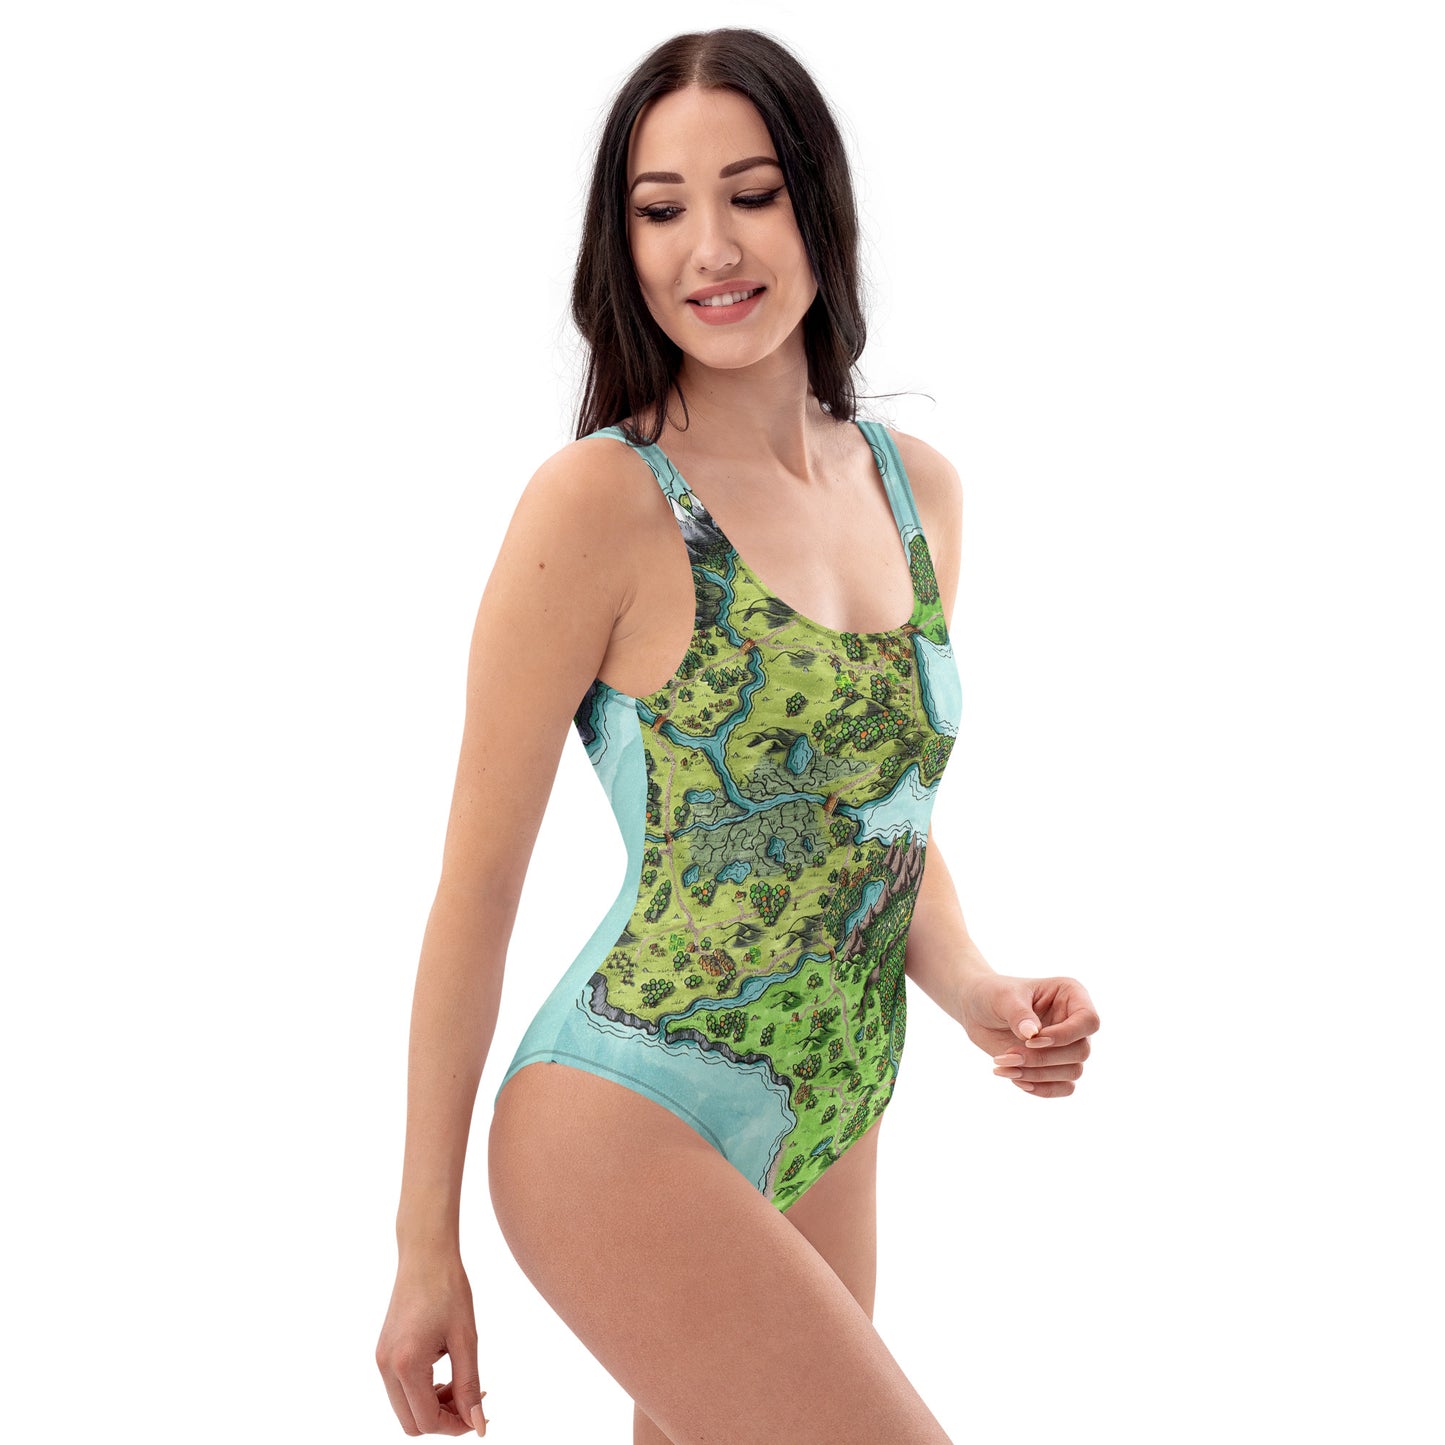 A model wears the Euphoros one piece swimsuit by Deven Rue, right view.